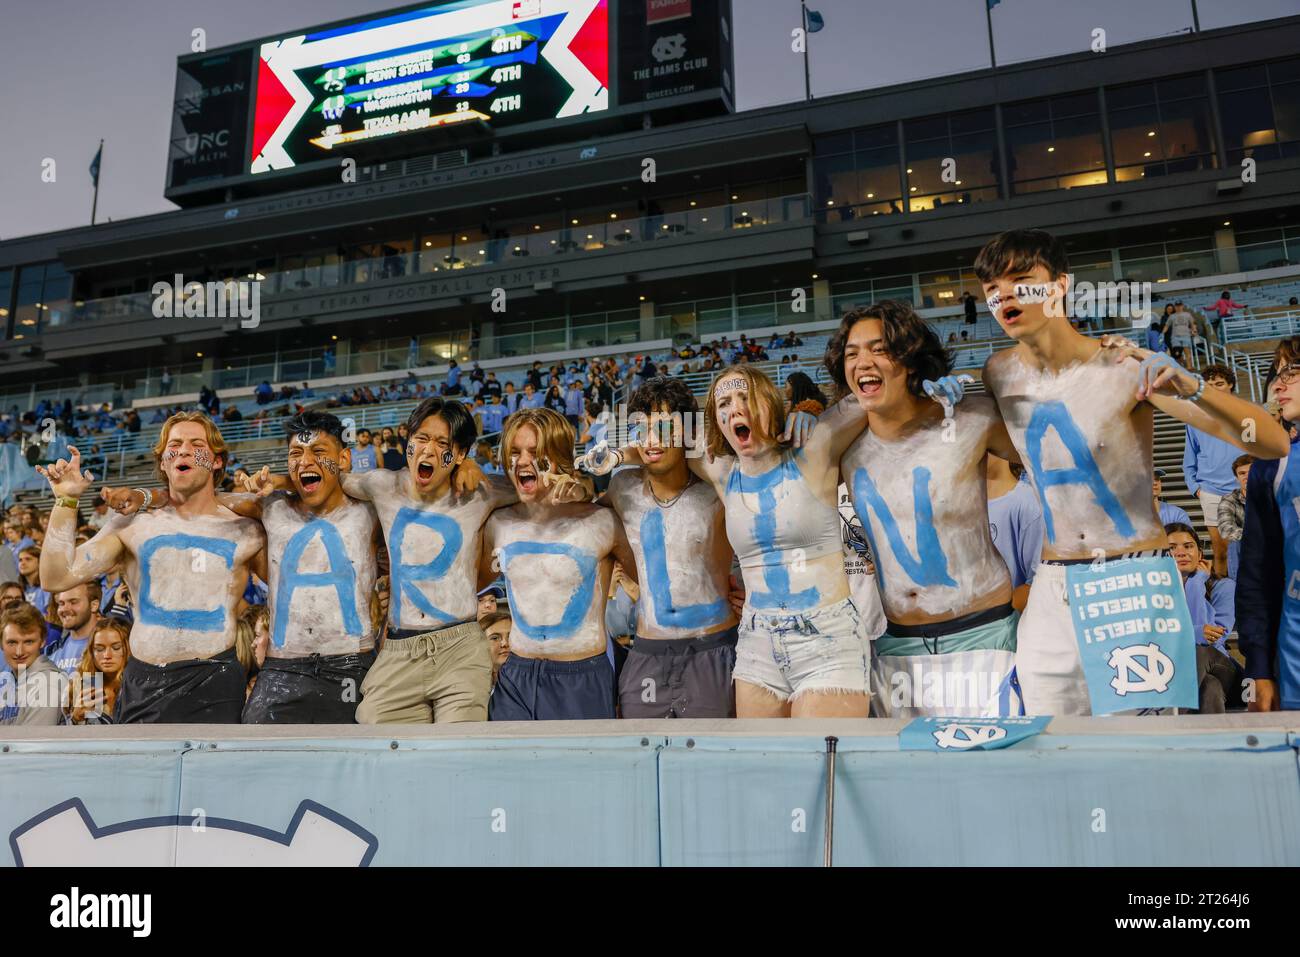 Chapel Hill, NC USA: North Carolina fans painted Carolina in blue and white to cheer for the team during an NCAA game against the Miami Hurricanes at Stock Photo